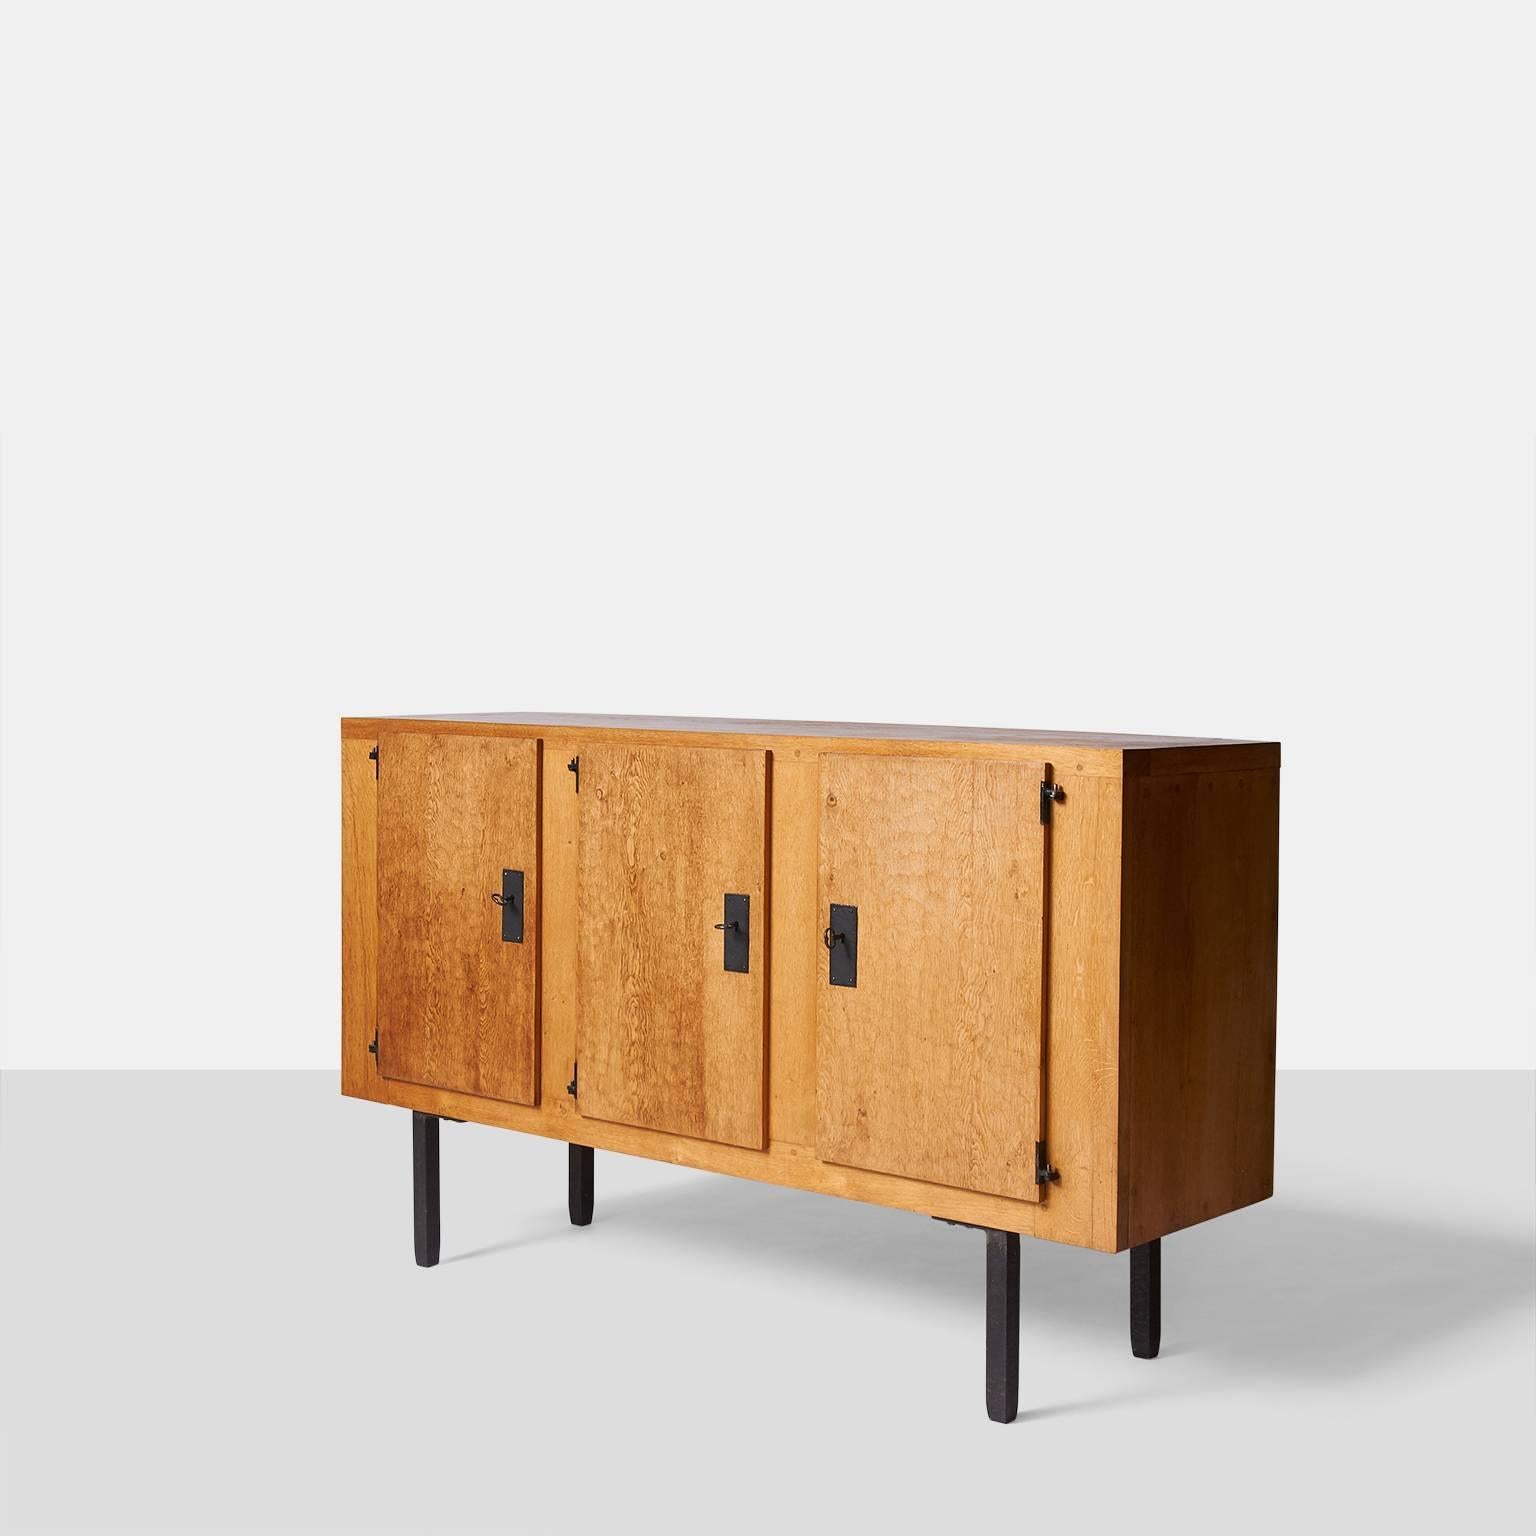 A Jean Touret sideboard with iron legs, hinges and escutcheon with key. There are three doors all with hand-carved detail, two adjustable shelves behind the two right sections and one behind the left side. Exposed dowel construction adds great